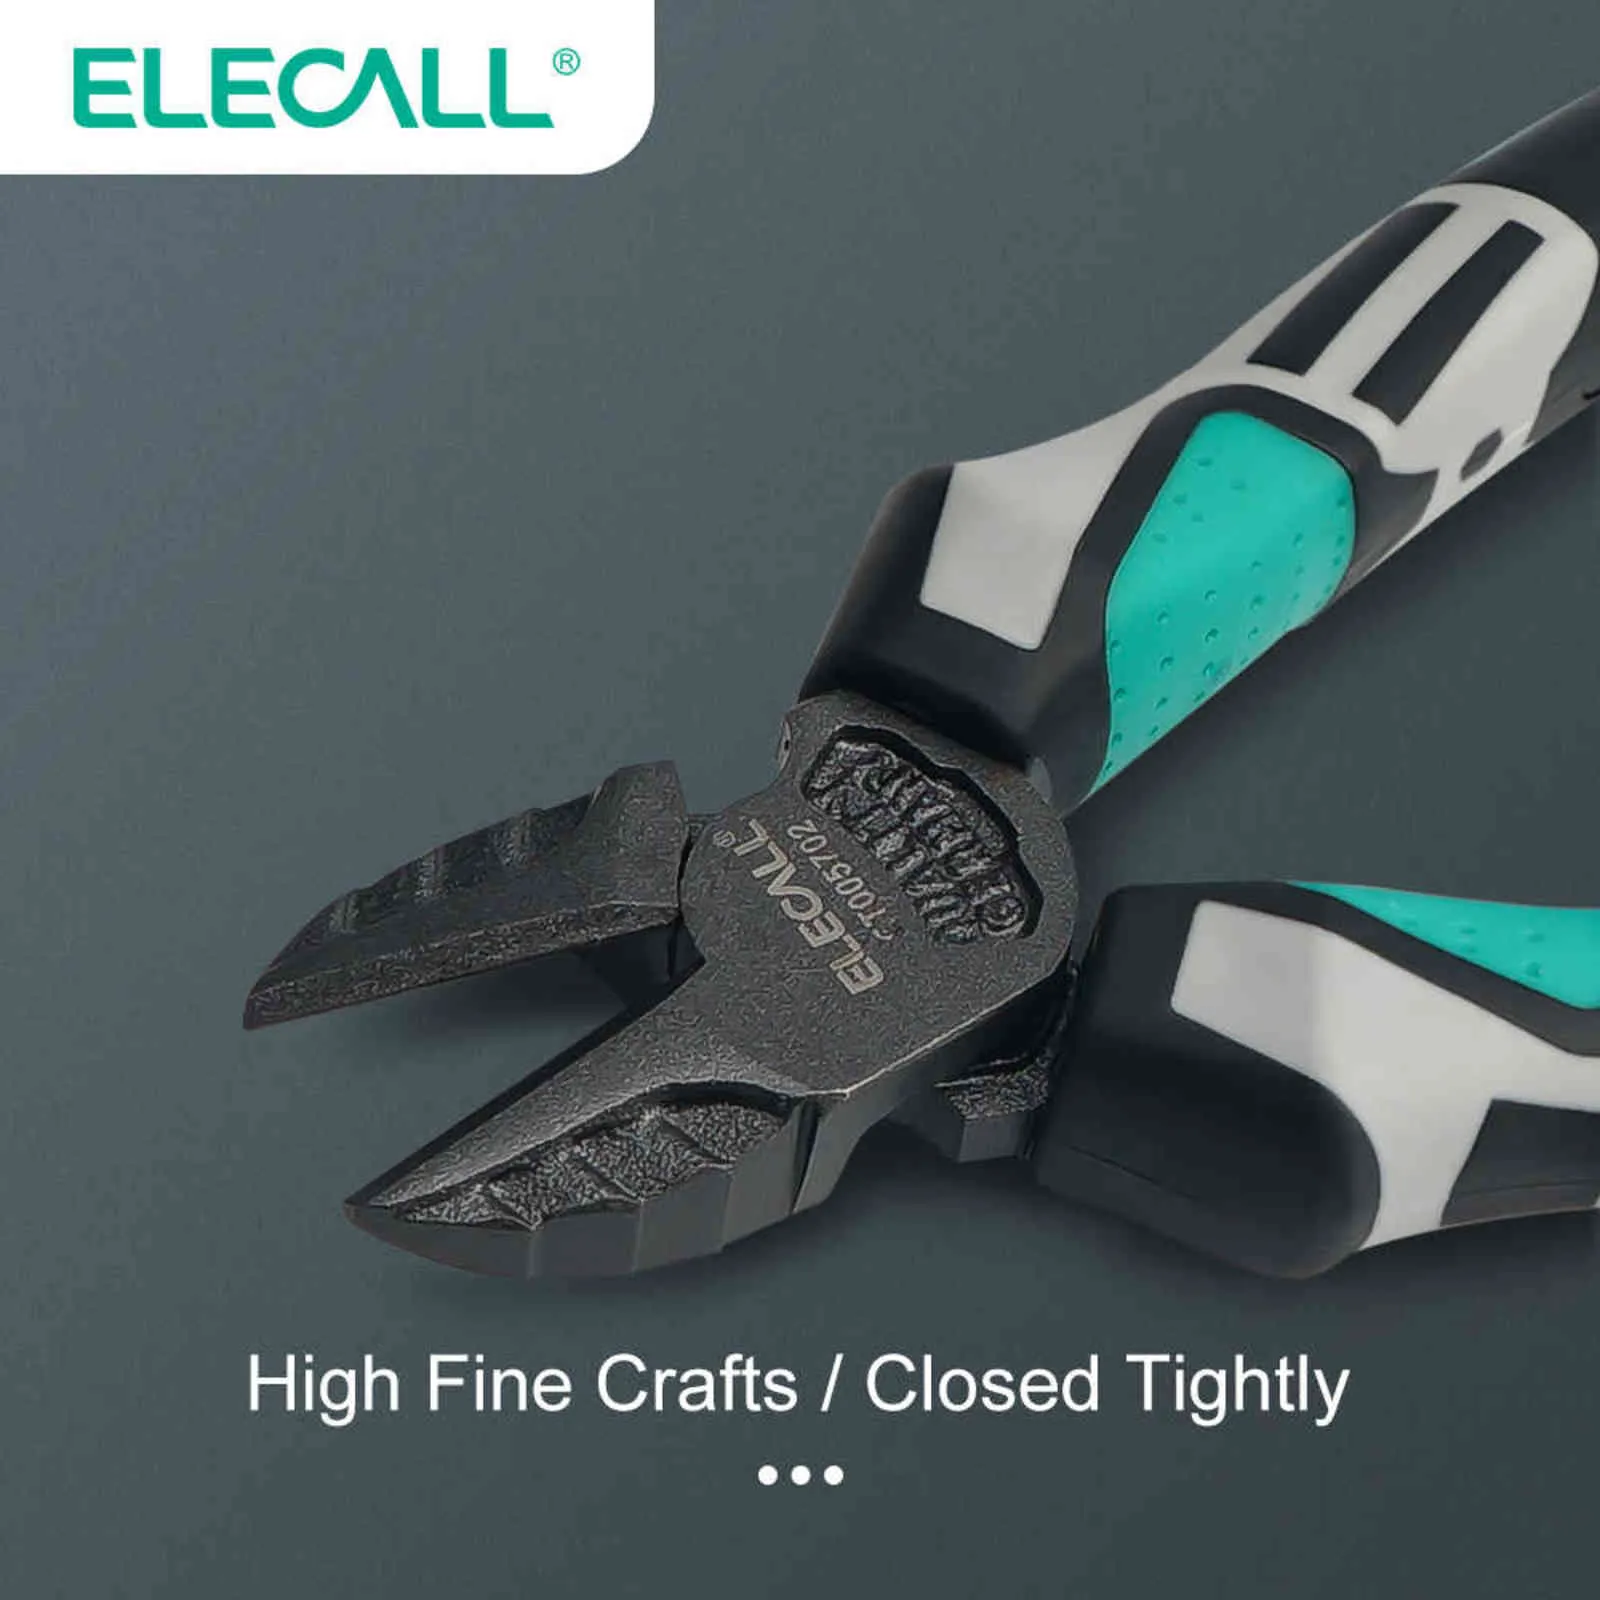 ELECALL Wire cutter pliers 6 7 Diagonal pliers cutting nipper wire stripper plier hand tools for cable cutters electri272H